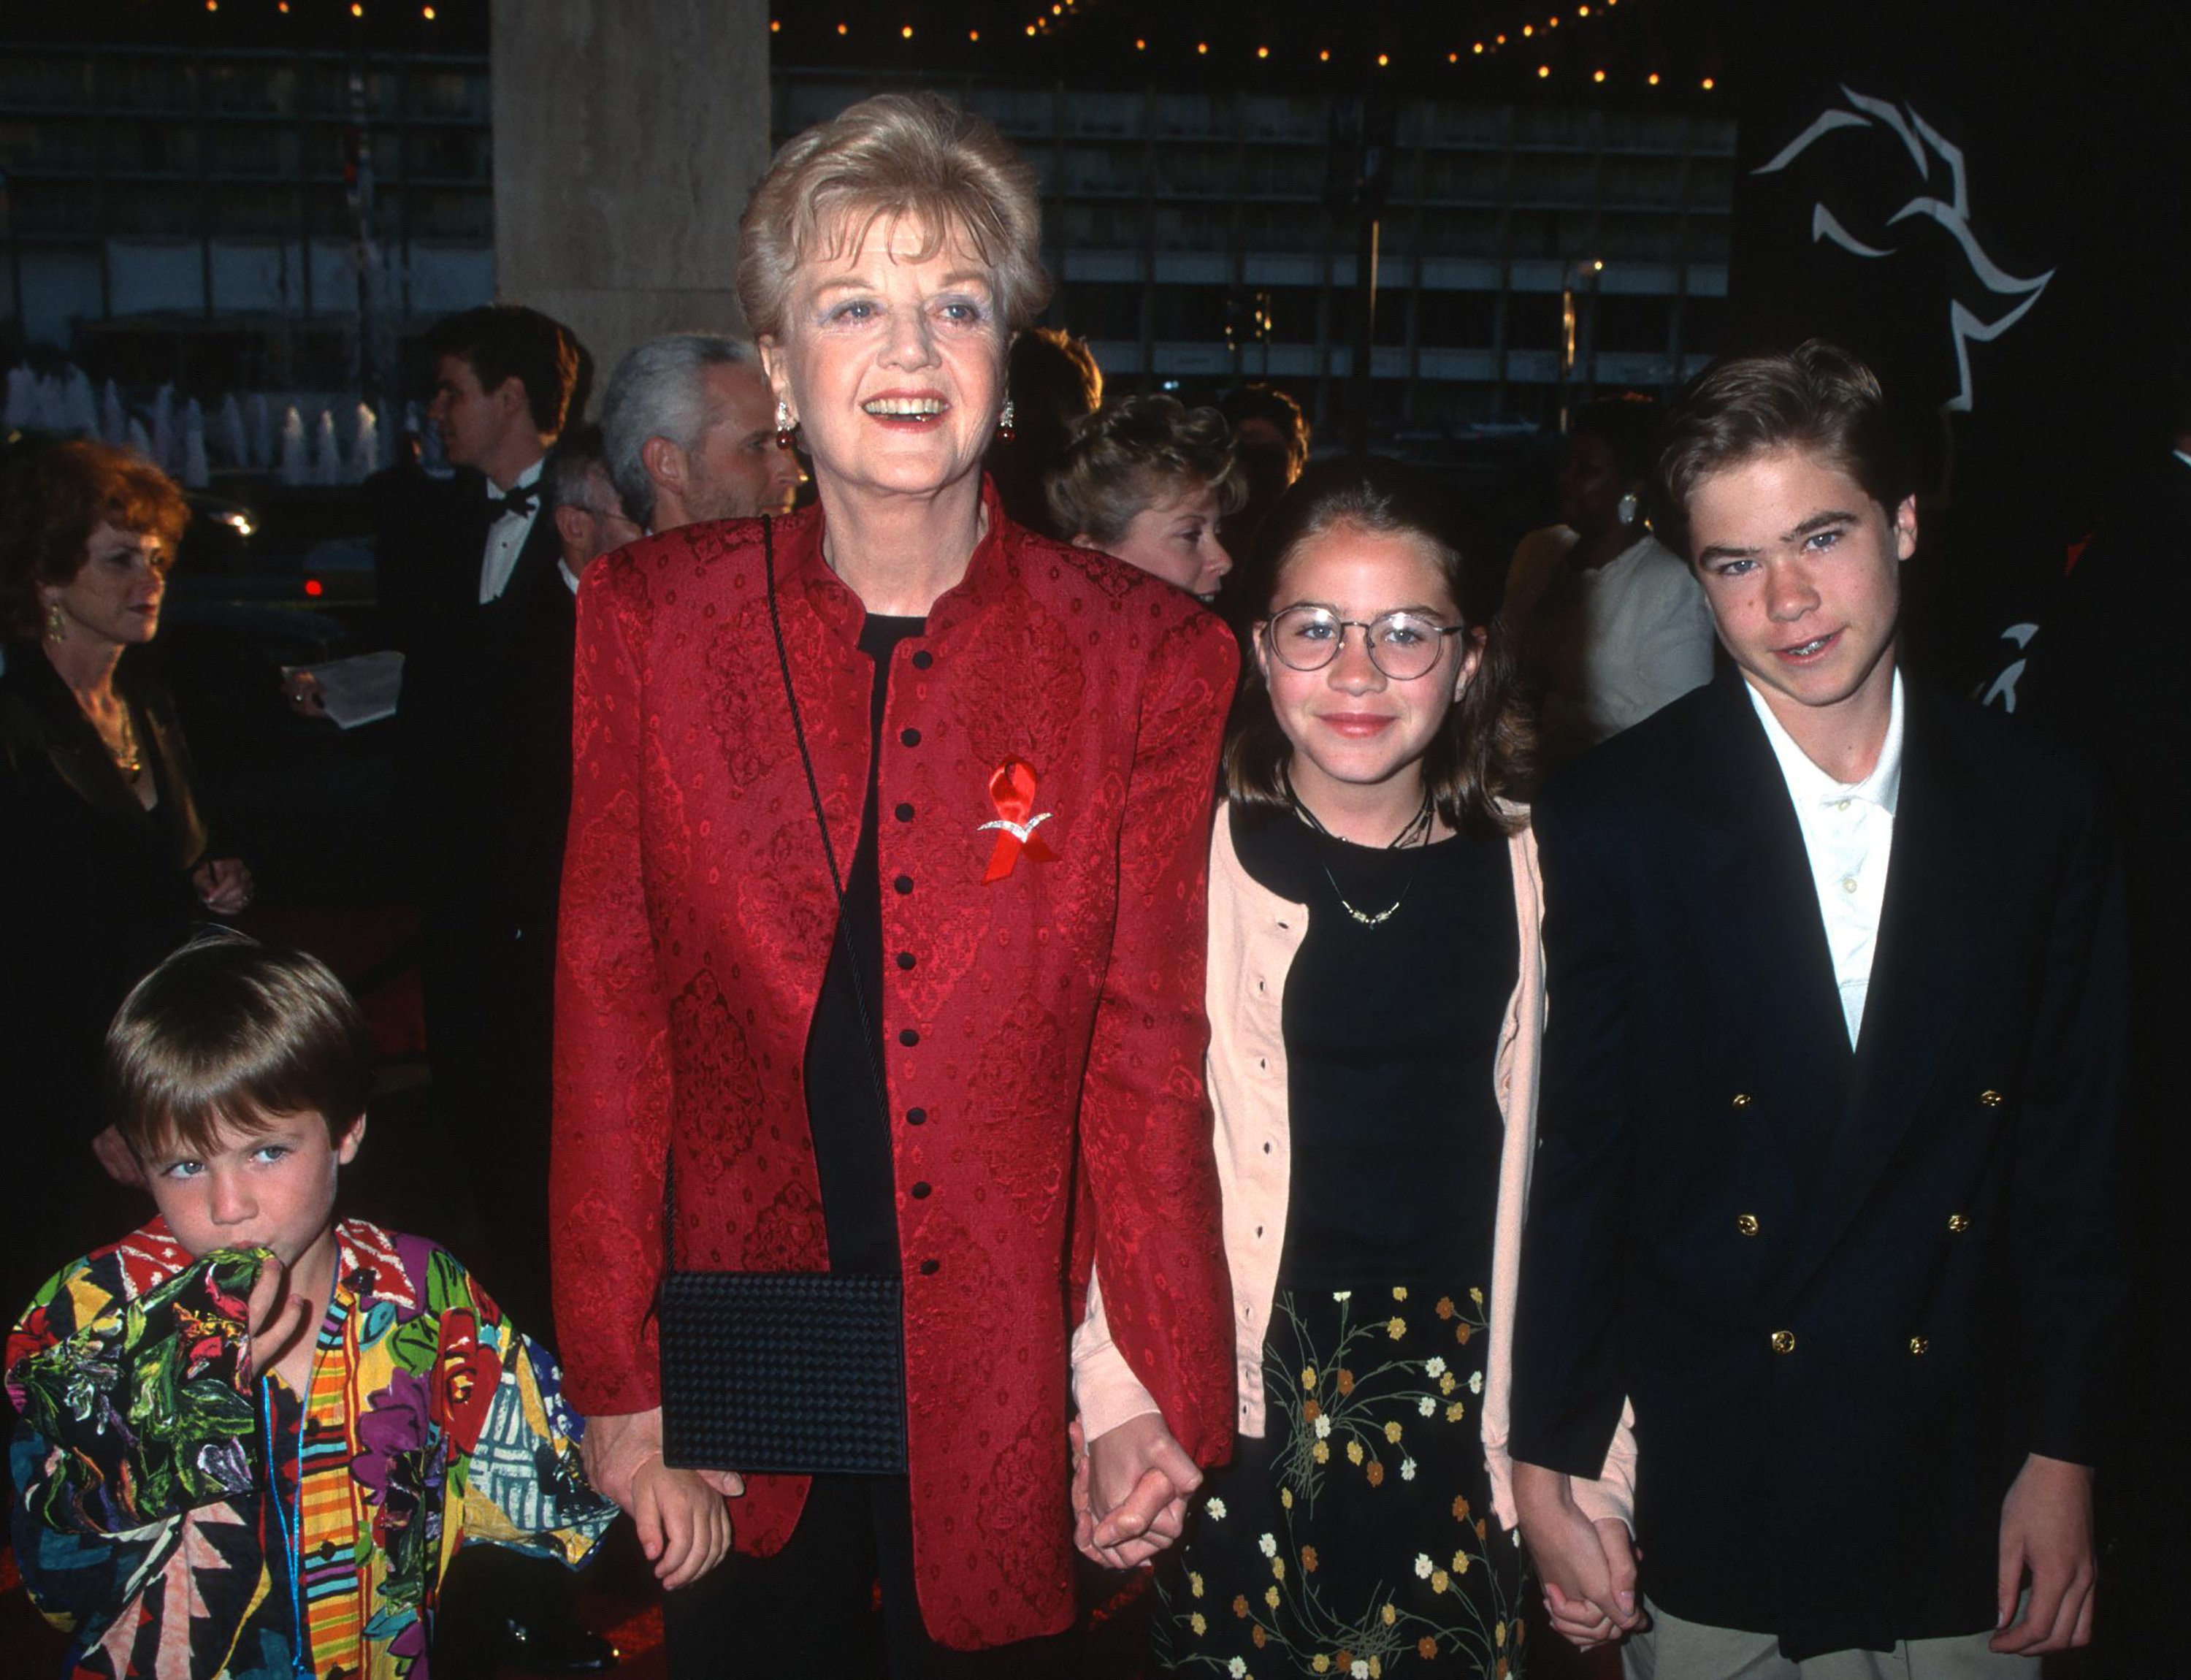 Angela Lansbury and her grandchildren Katherine Shaw, Peter Shaw Jr., and Ian Lasbury at the "Beauty and the Beast" performance at the Shubert Theater in Century City, California on April 13, 1995 | Source: Getty Images